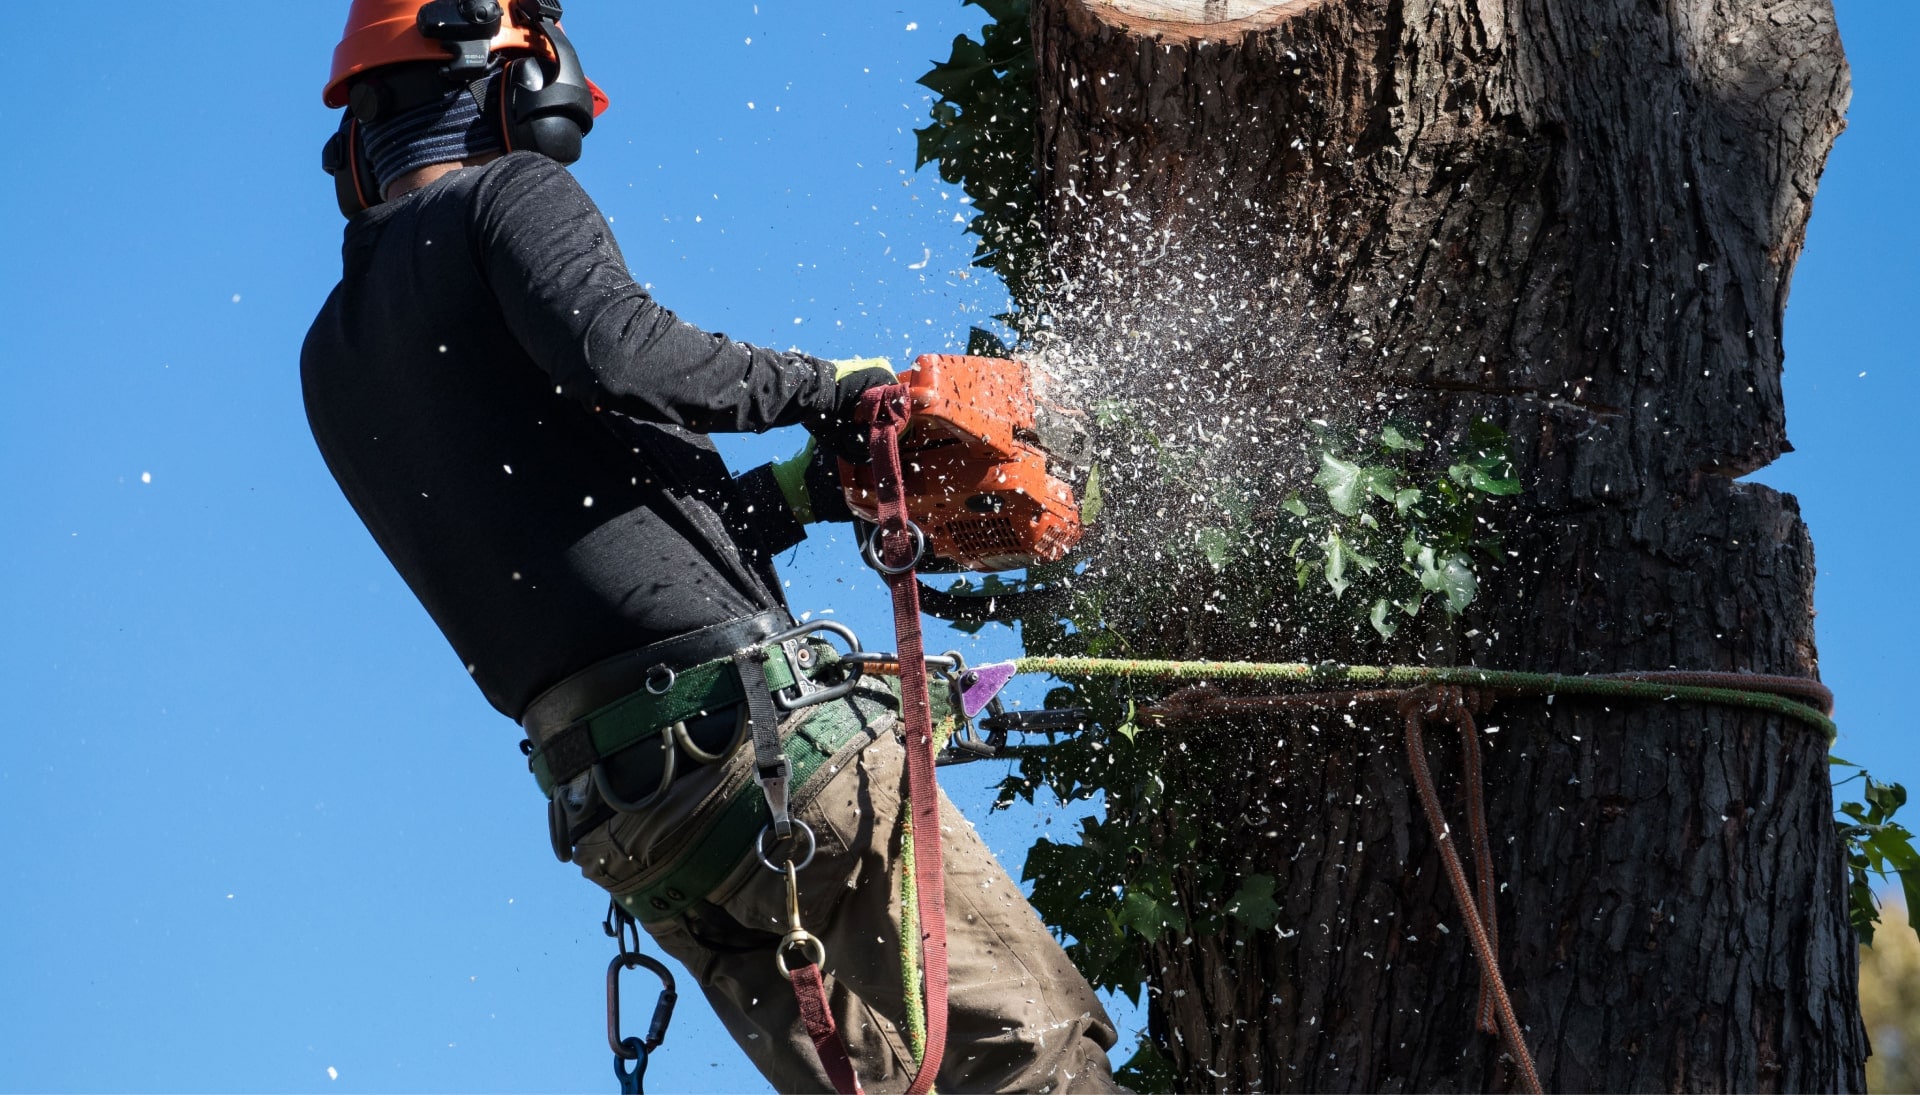 A tree removal expert is high in tree to cut down stump in Fairfield,CA.